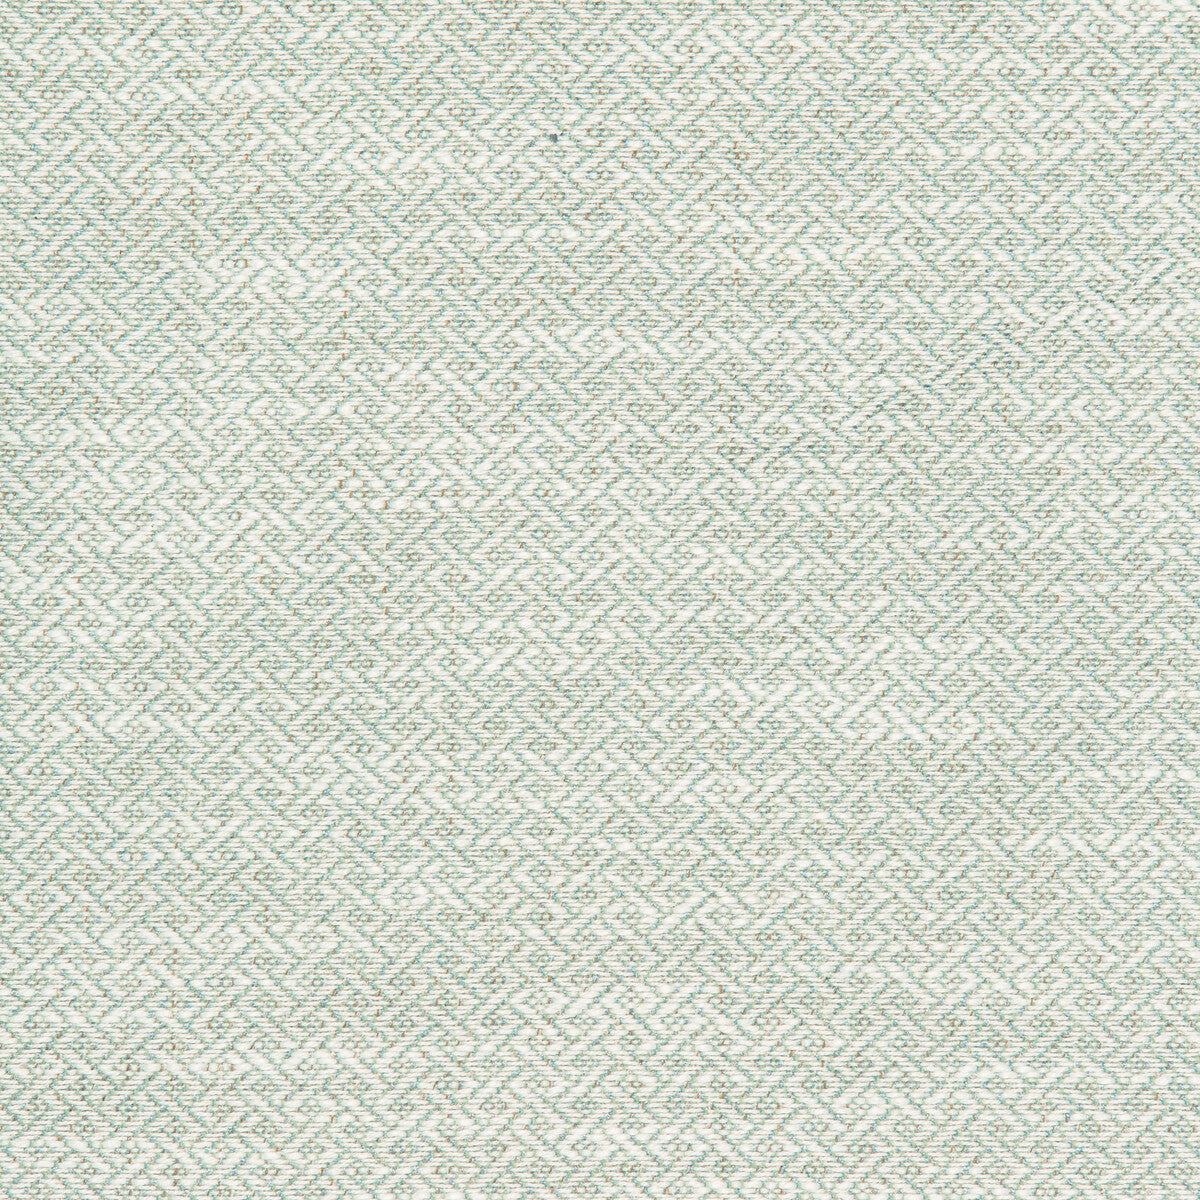 Kravet Design fabric in 36086-113 color - pattern 36086.113.0 - by Kravet Design in the Inside Out Performance Fabrics collection